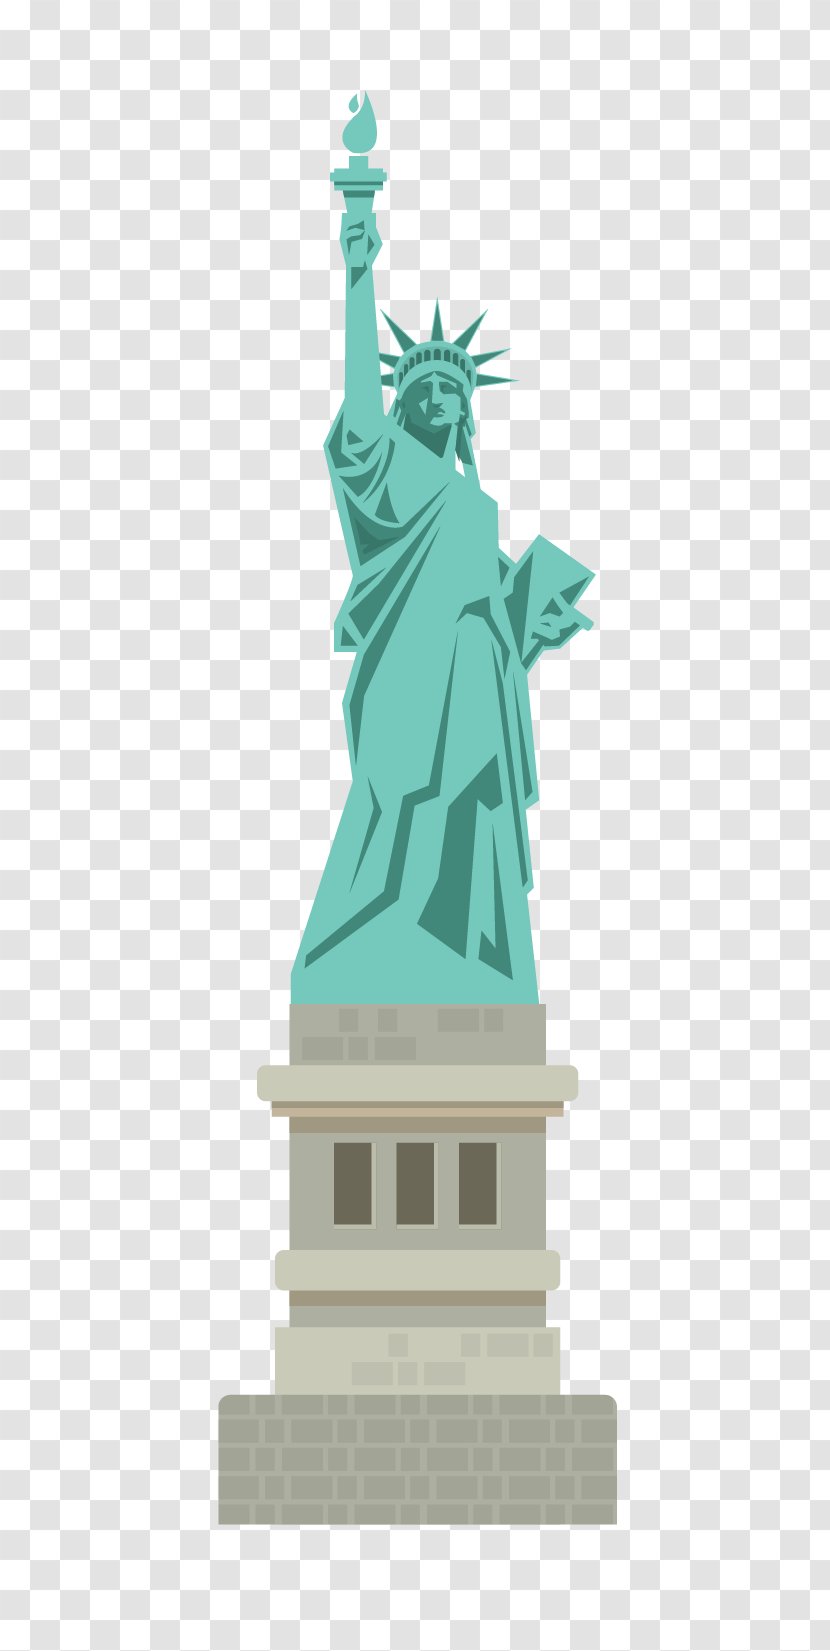 Statue Of Liberty Subscriber Identity Module Prepay Mobile Phone LTE 4G Transparent PNG